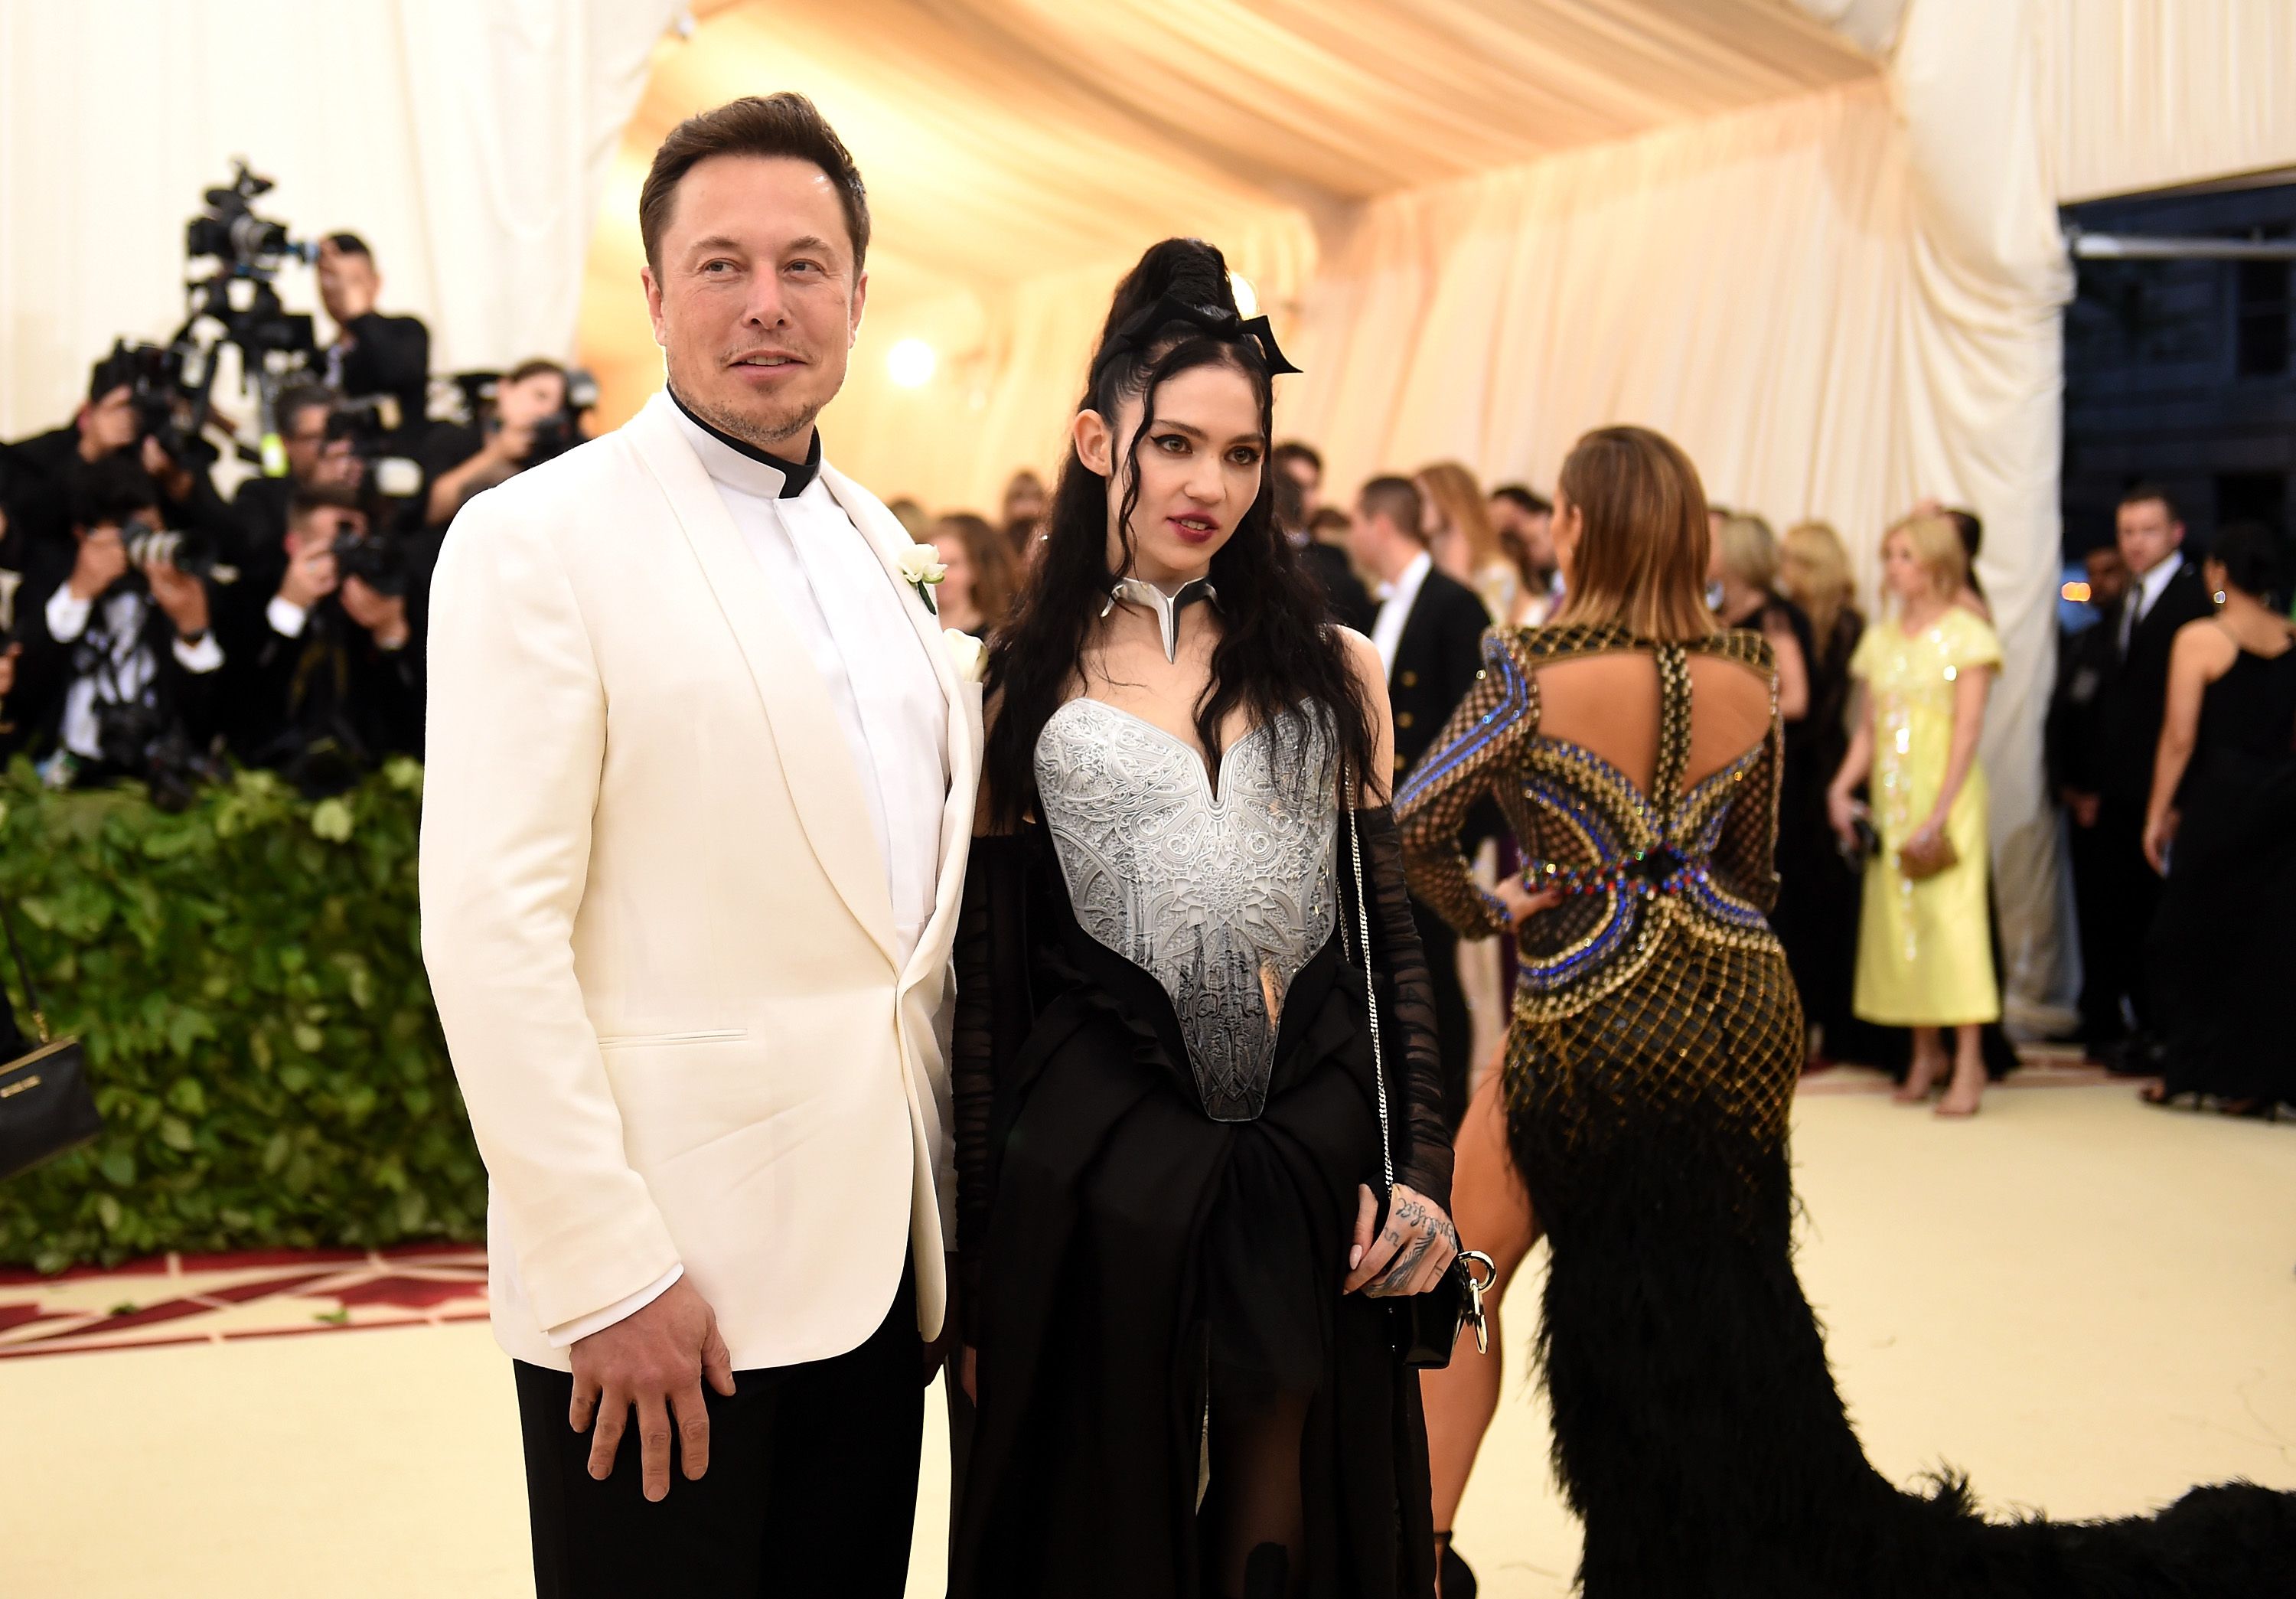 Elon Musk and Grimes at the Heavenly Bodies: Fashion & The Catholic Imagination Costume Institute Gala at The Metropolitan Museum of Art on May 7, 2018 | Photo: Getty Images